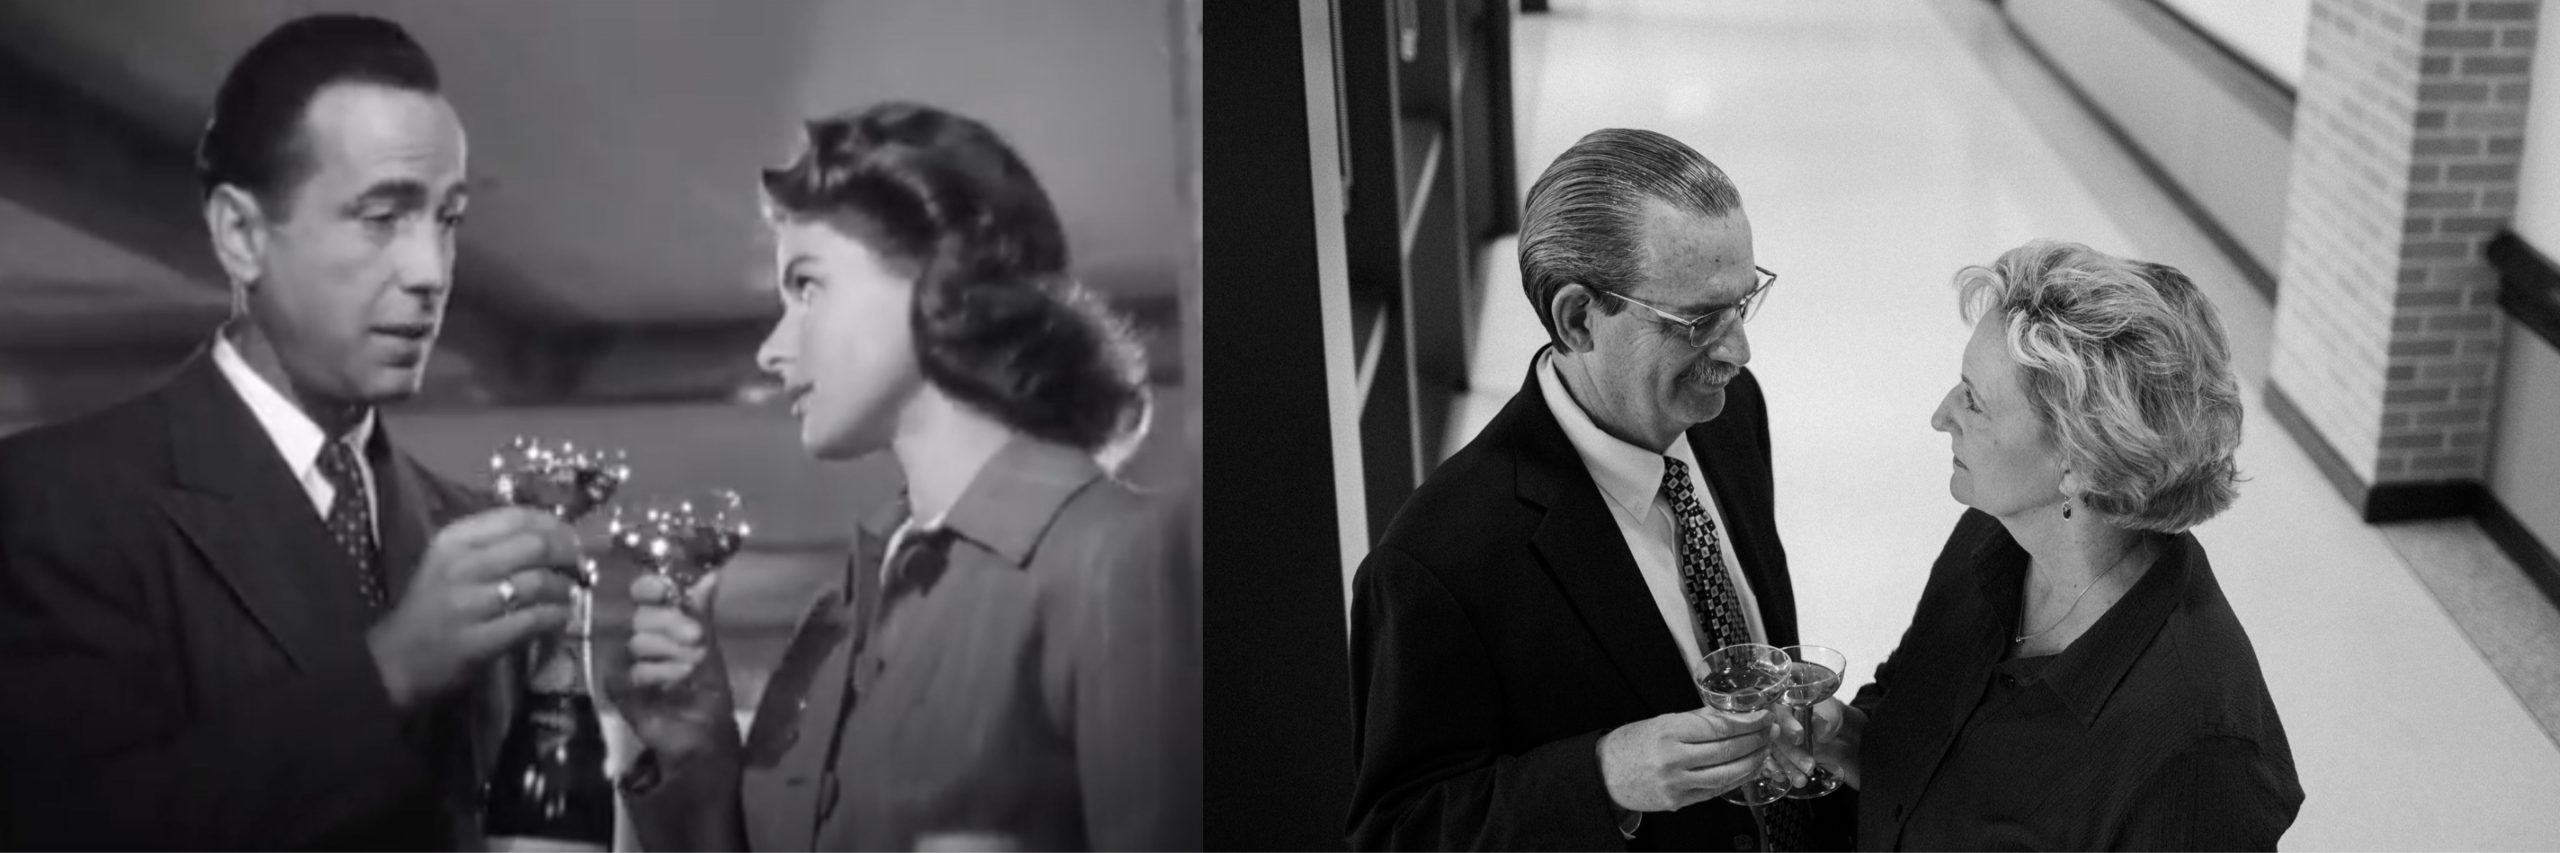 Black and white side by side images of a man and woman looking at each other and clinking their drink glasses together.